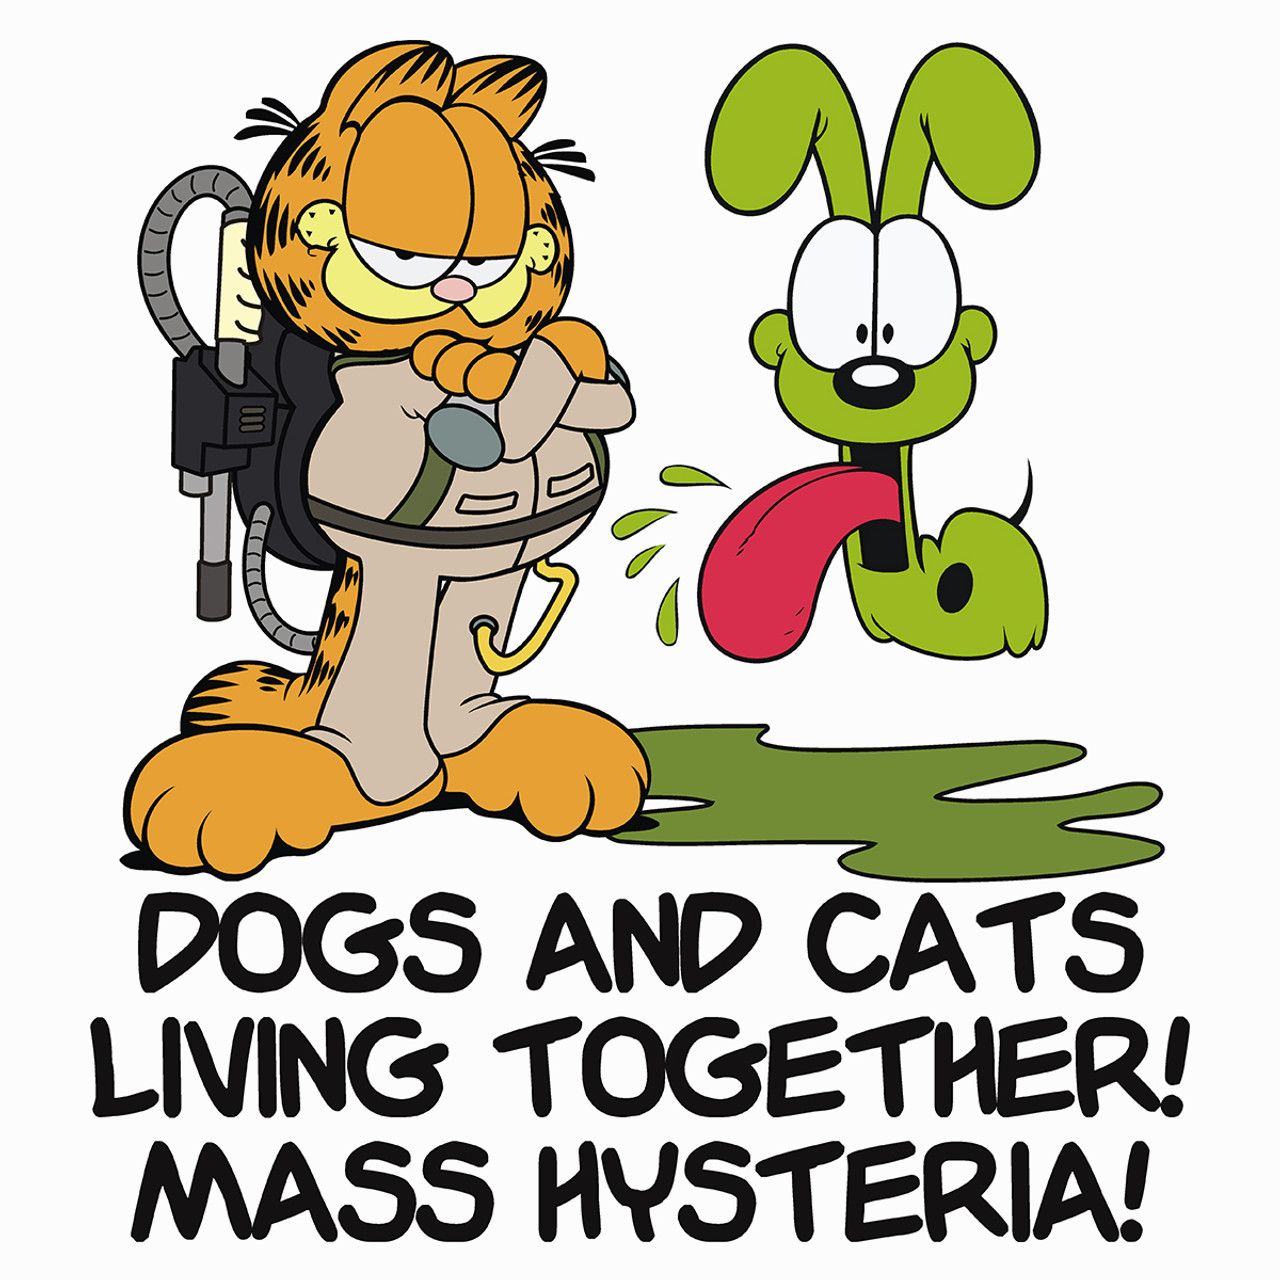 Dogs and Cats Living Together! Mass Hysteria!